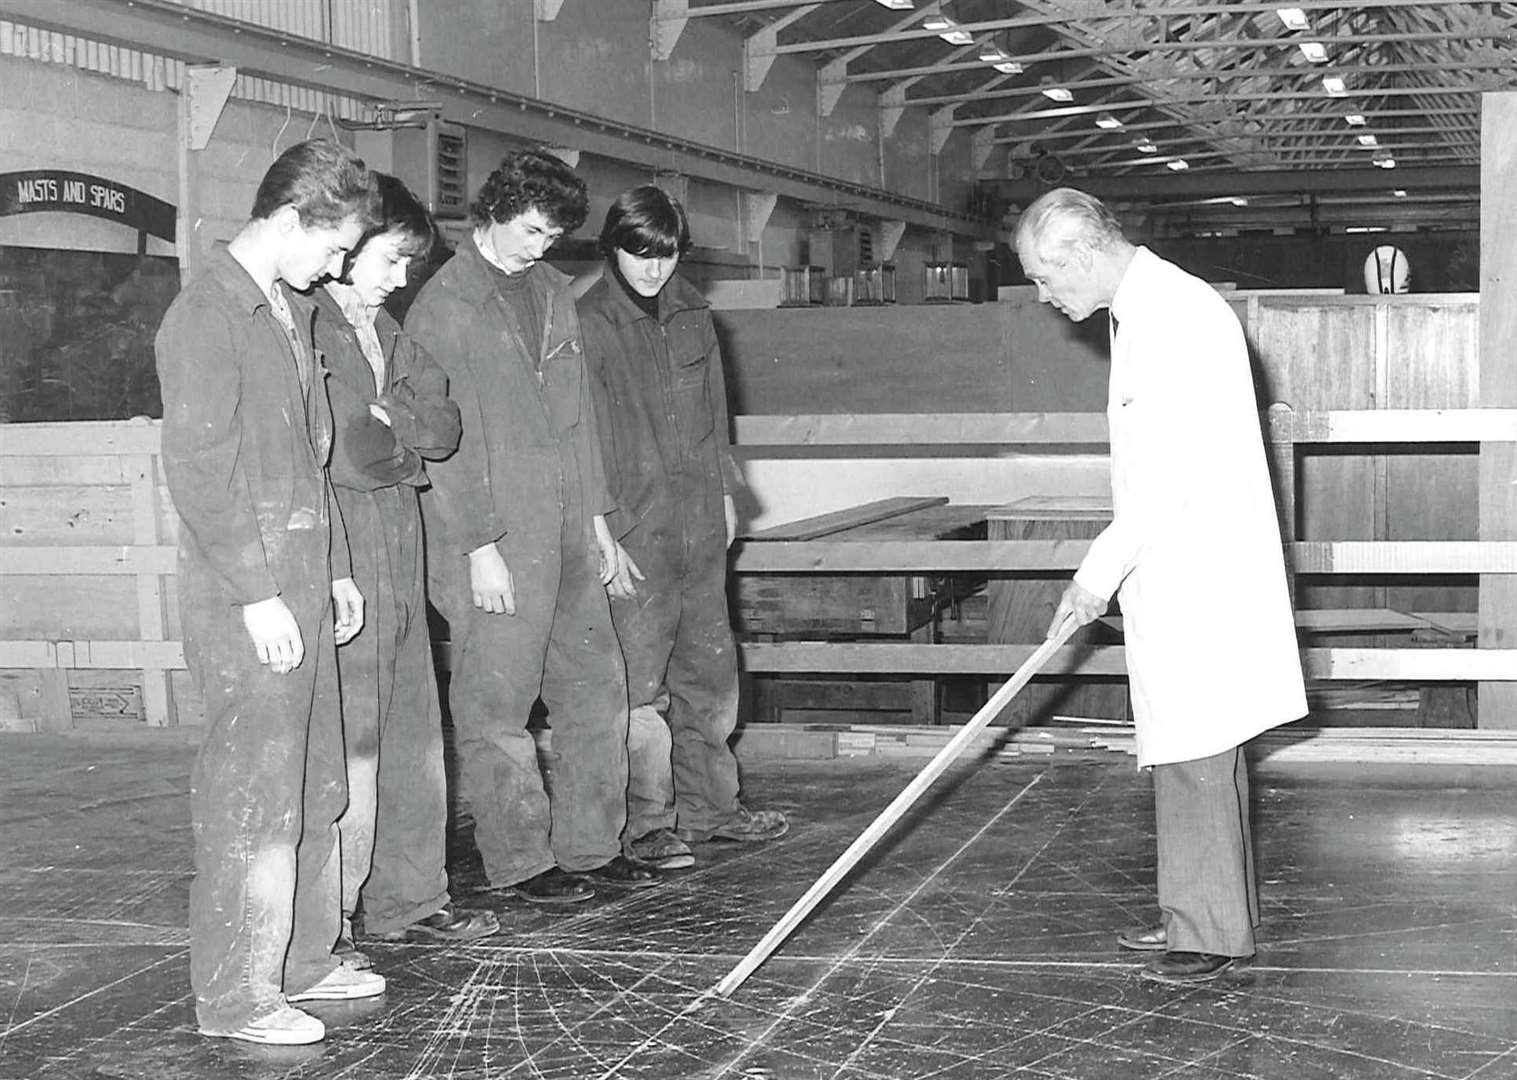 1970s shipwright apprentices with an instructor showing laying off on the mould loft floor. Dennis Jarvis is the instructor